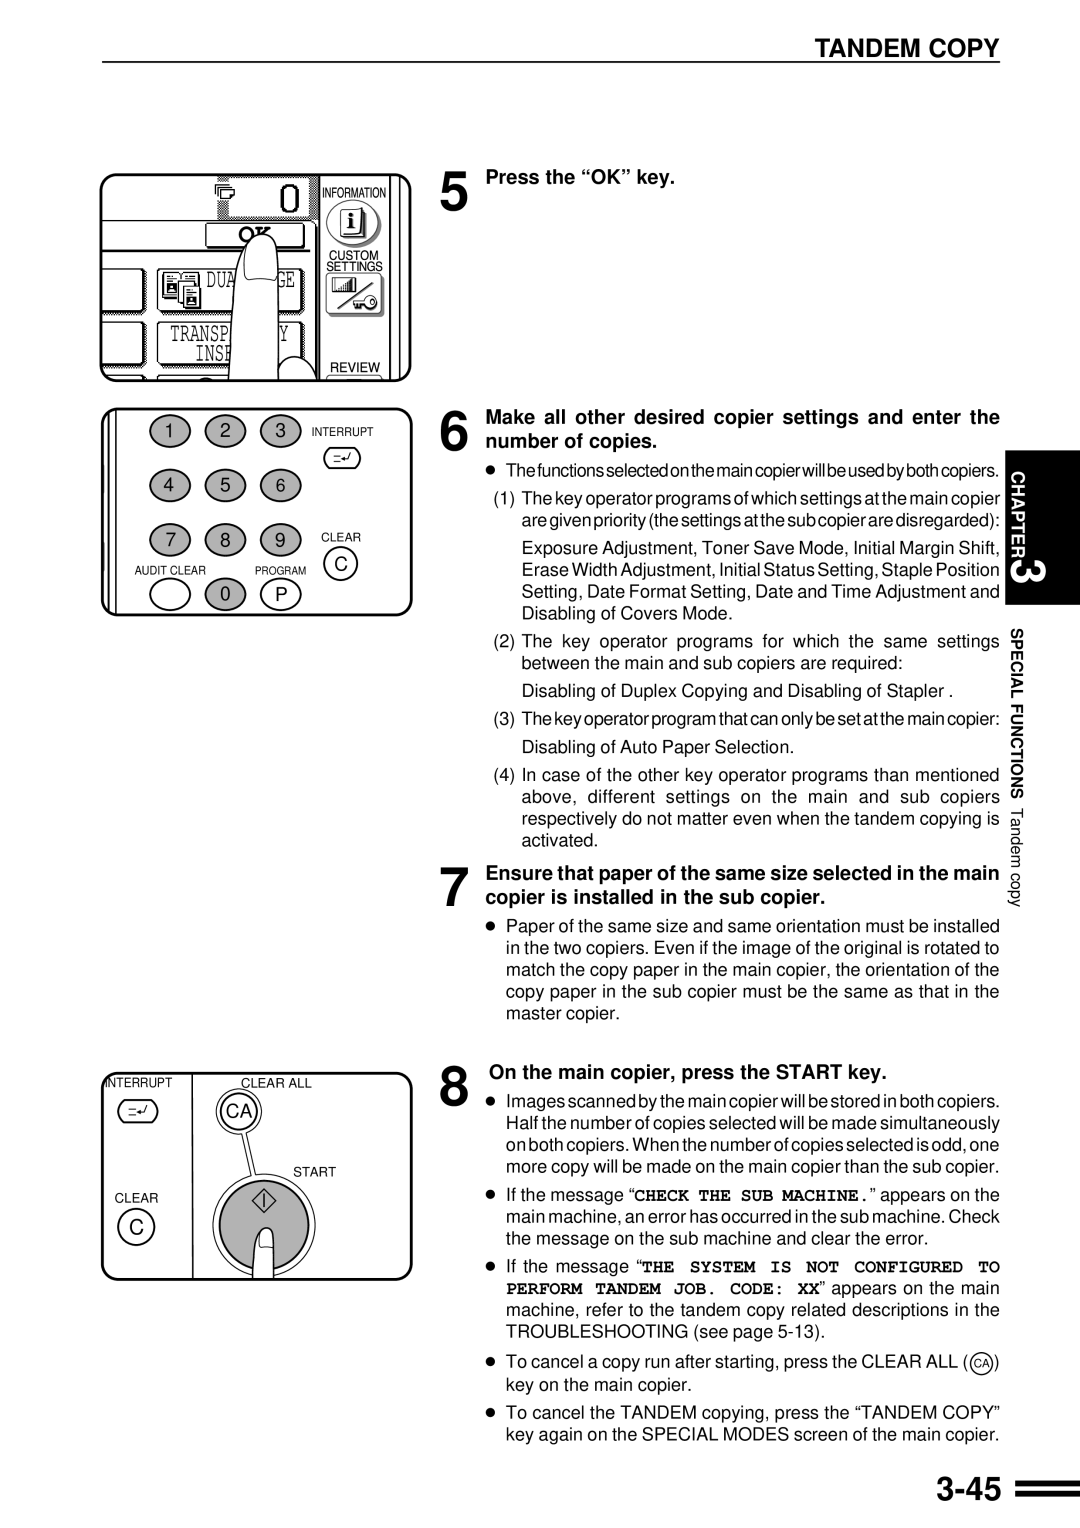 Sharp AR-287 manual 3-45, Dual Page Copy Transparency Inserts, Press the “OK” key, number of copies 